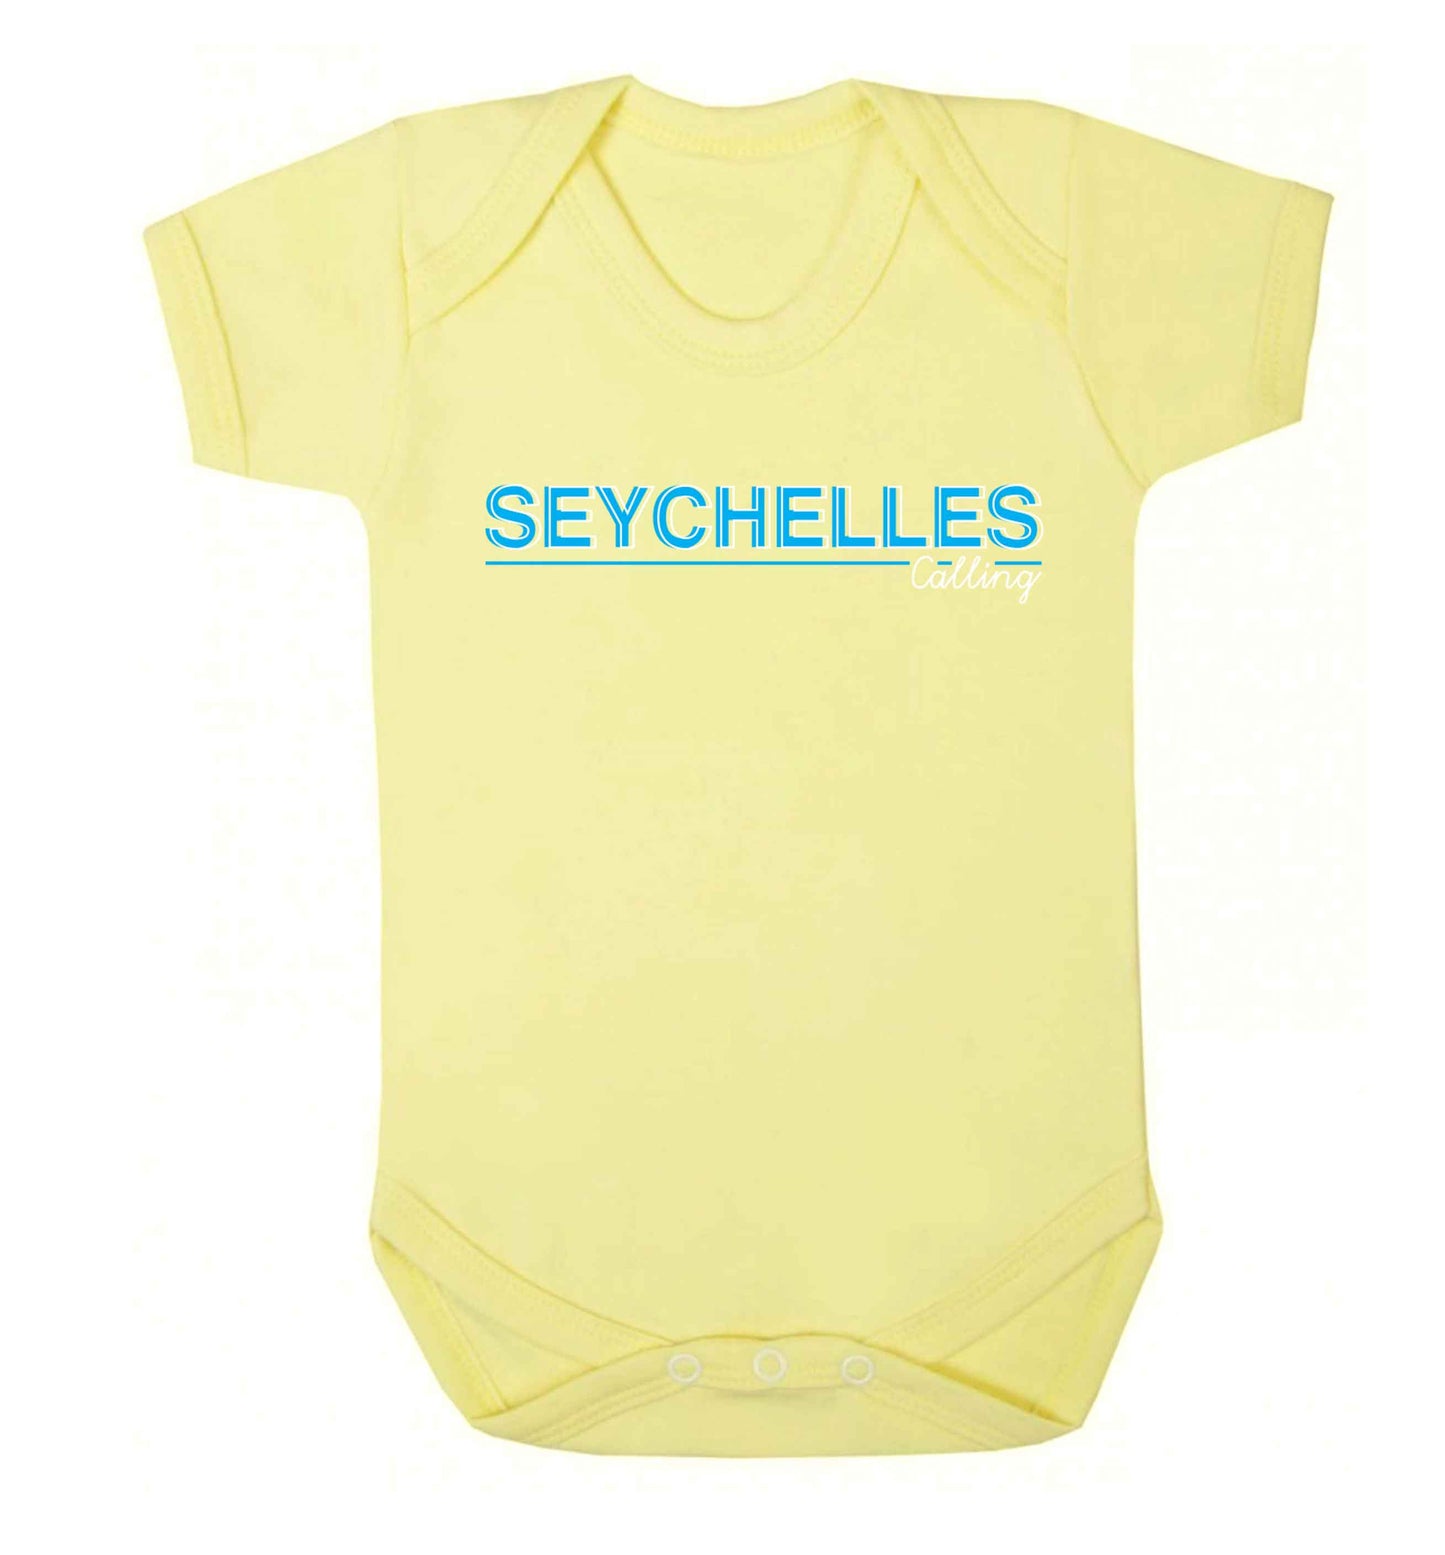 Seychelles calling Baby Vest pale yellow 18-24 months